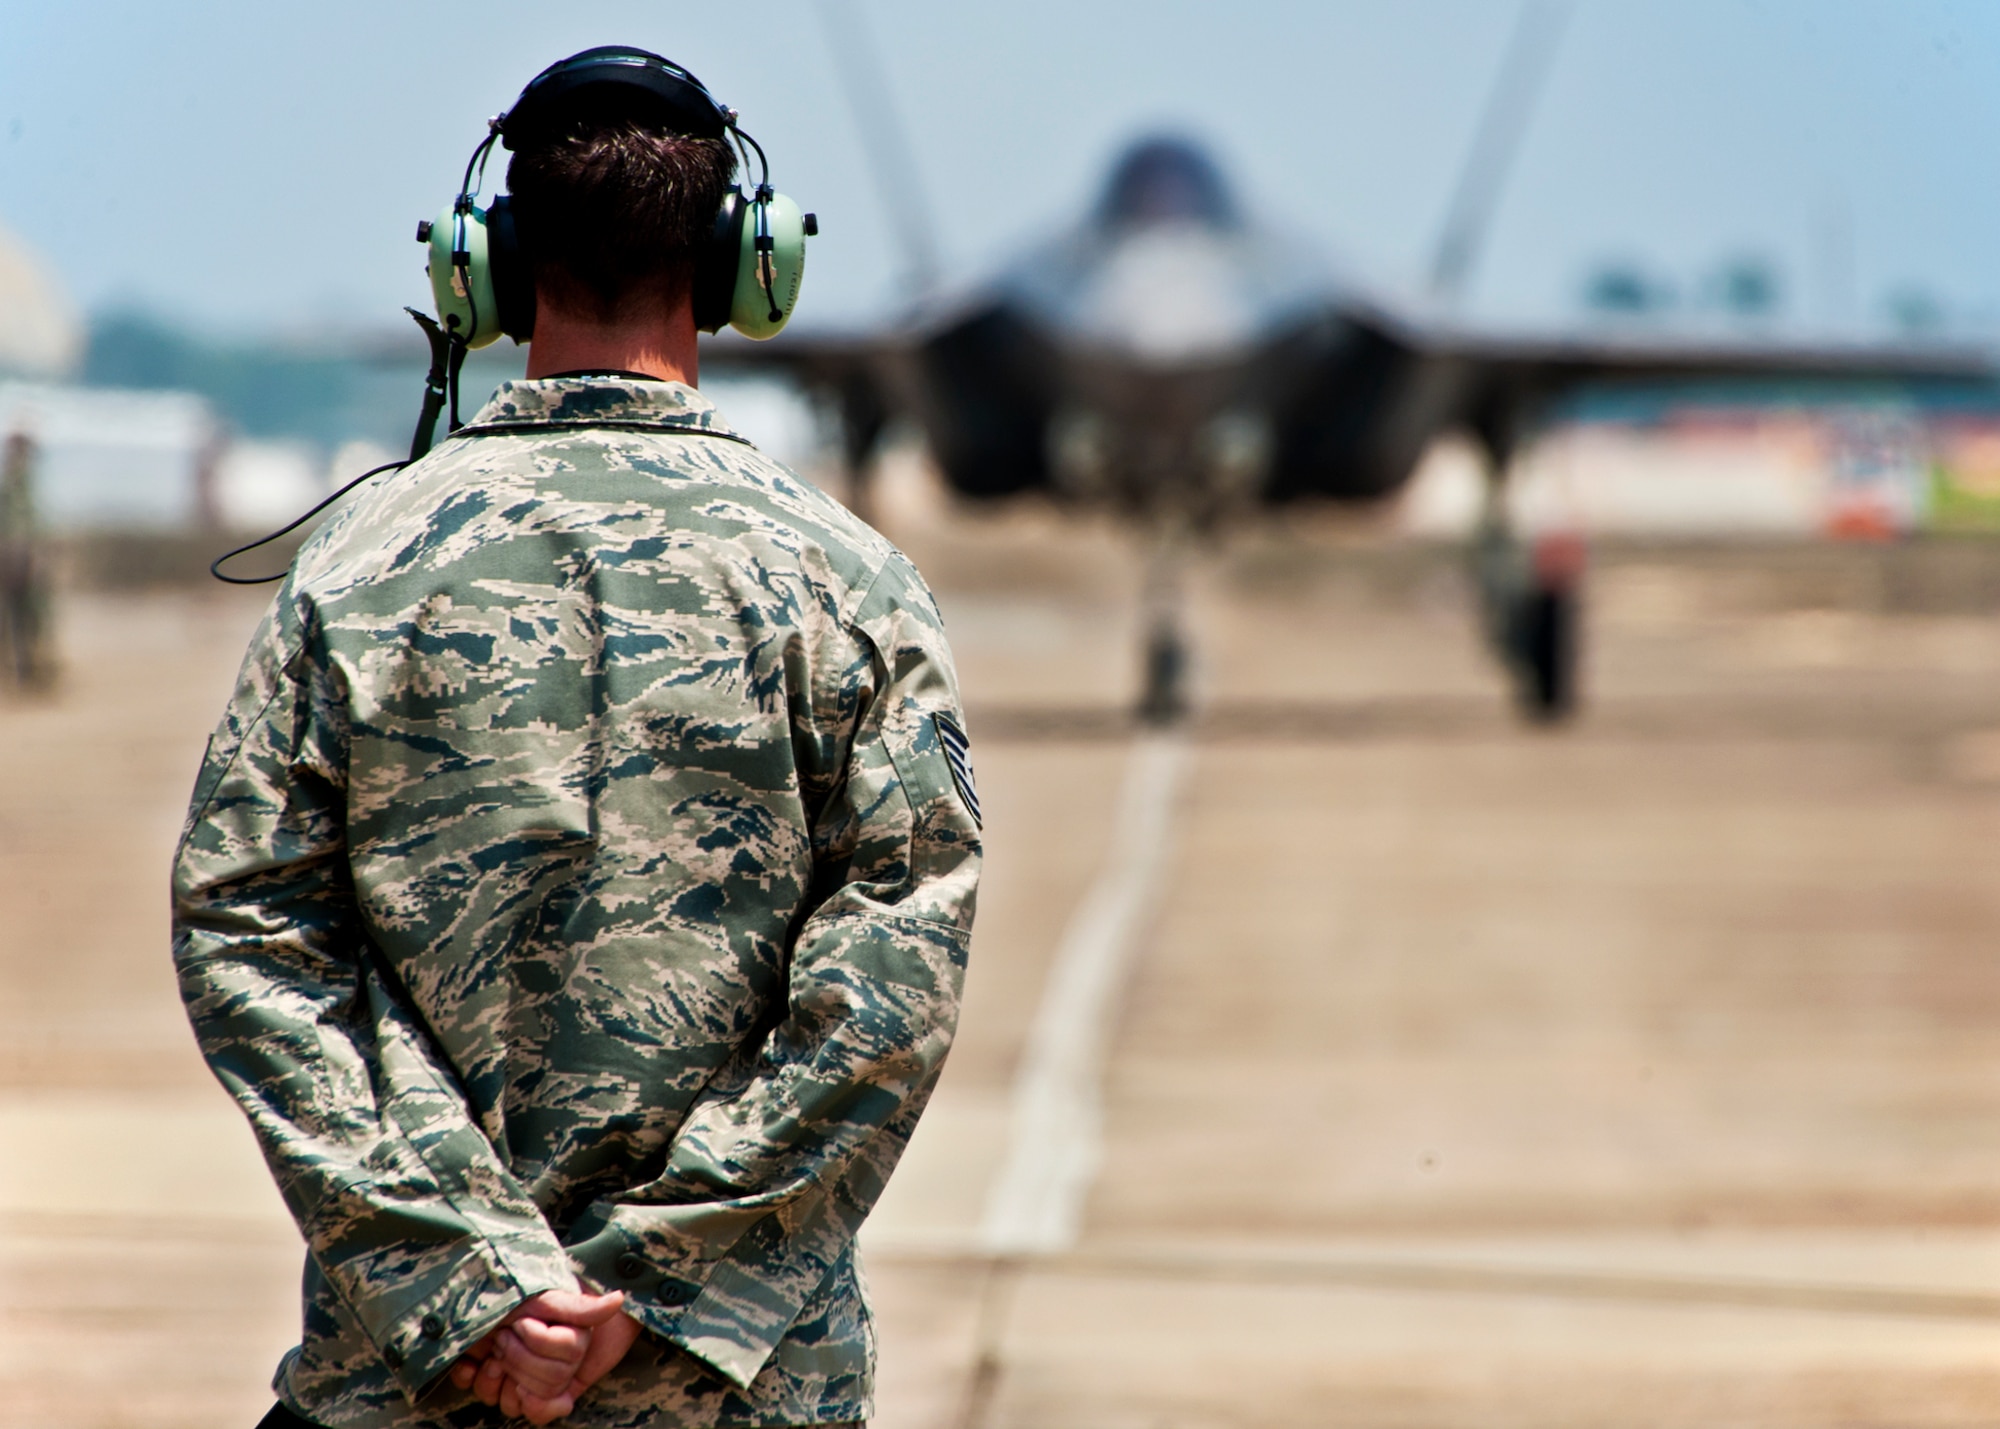 F-35 Lightning II joint strike fighter crew chief, Tech. Sgt. Brian West, watches his aircraft approach for the first time at Eglin Air Force Base, Fla., July 14.  Aircraft 0747 is DoD’s newest aircraft.  (U.S. Air Force photo/Samuel King Jr.)